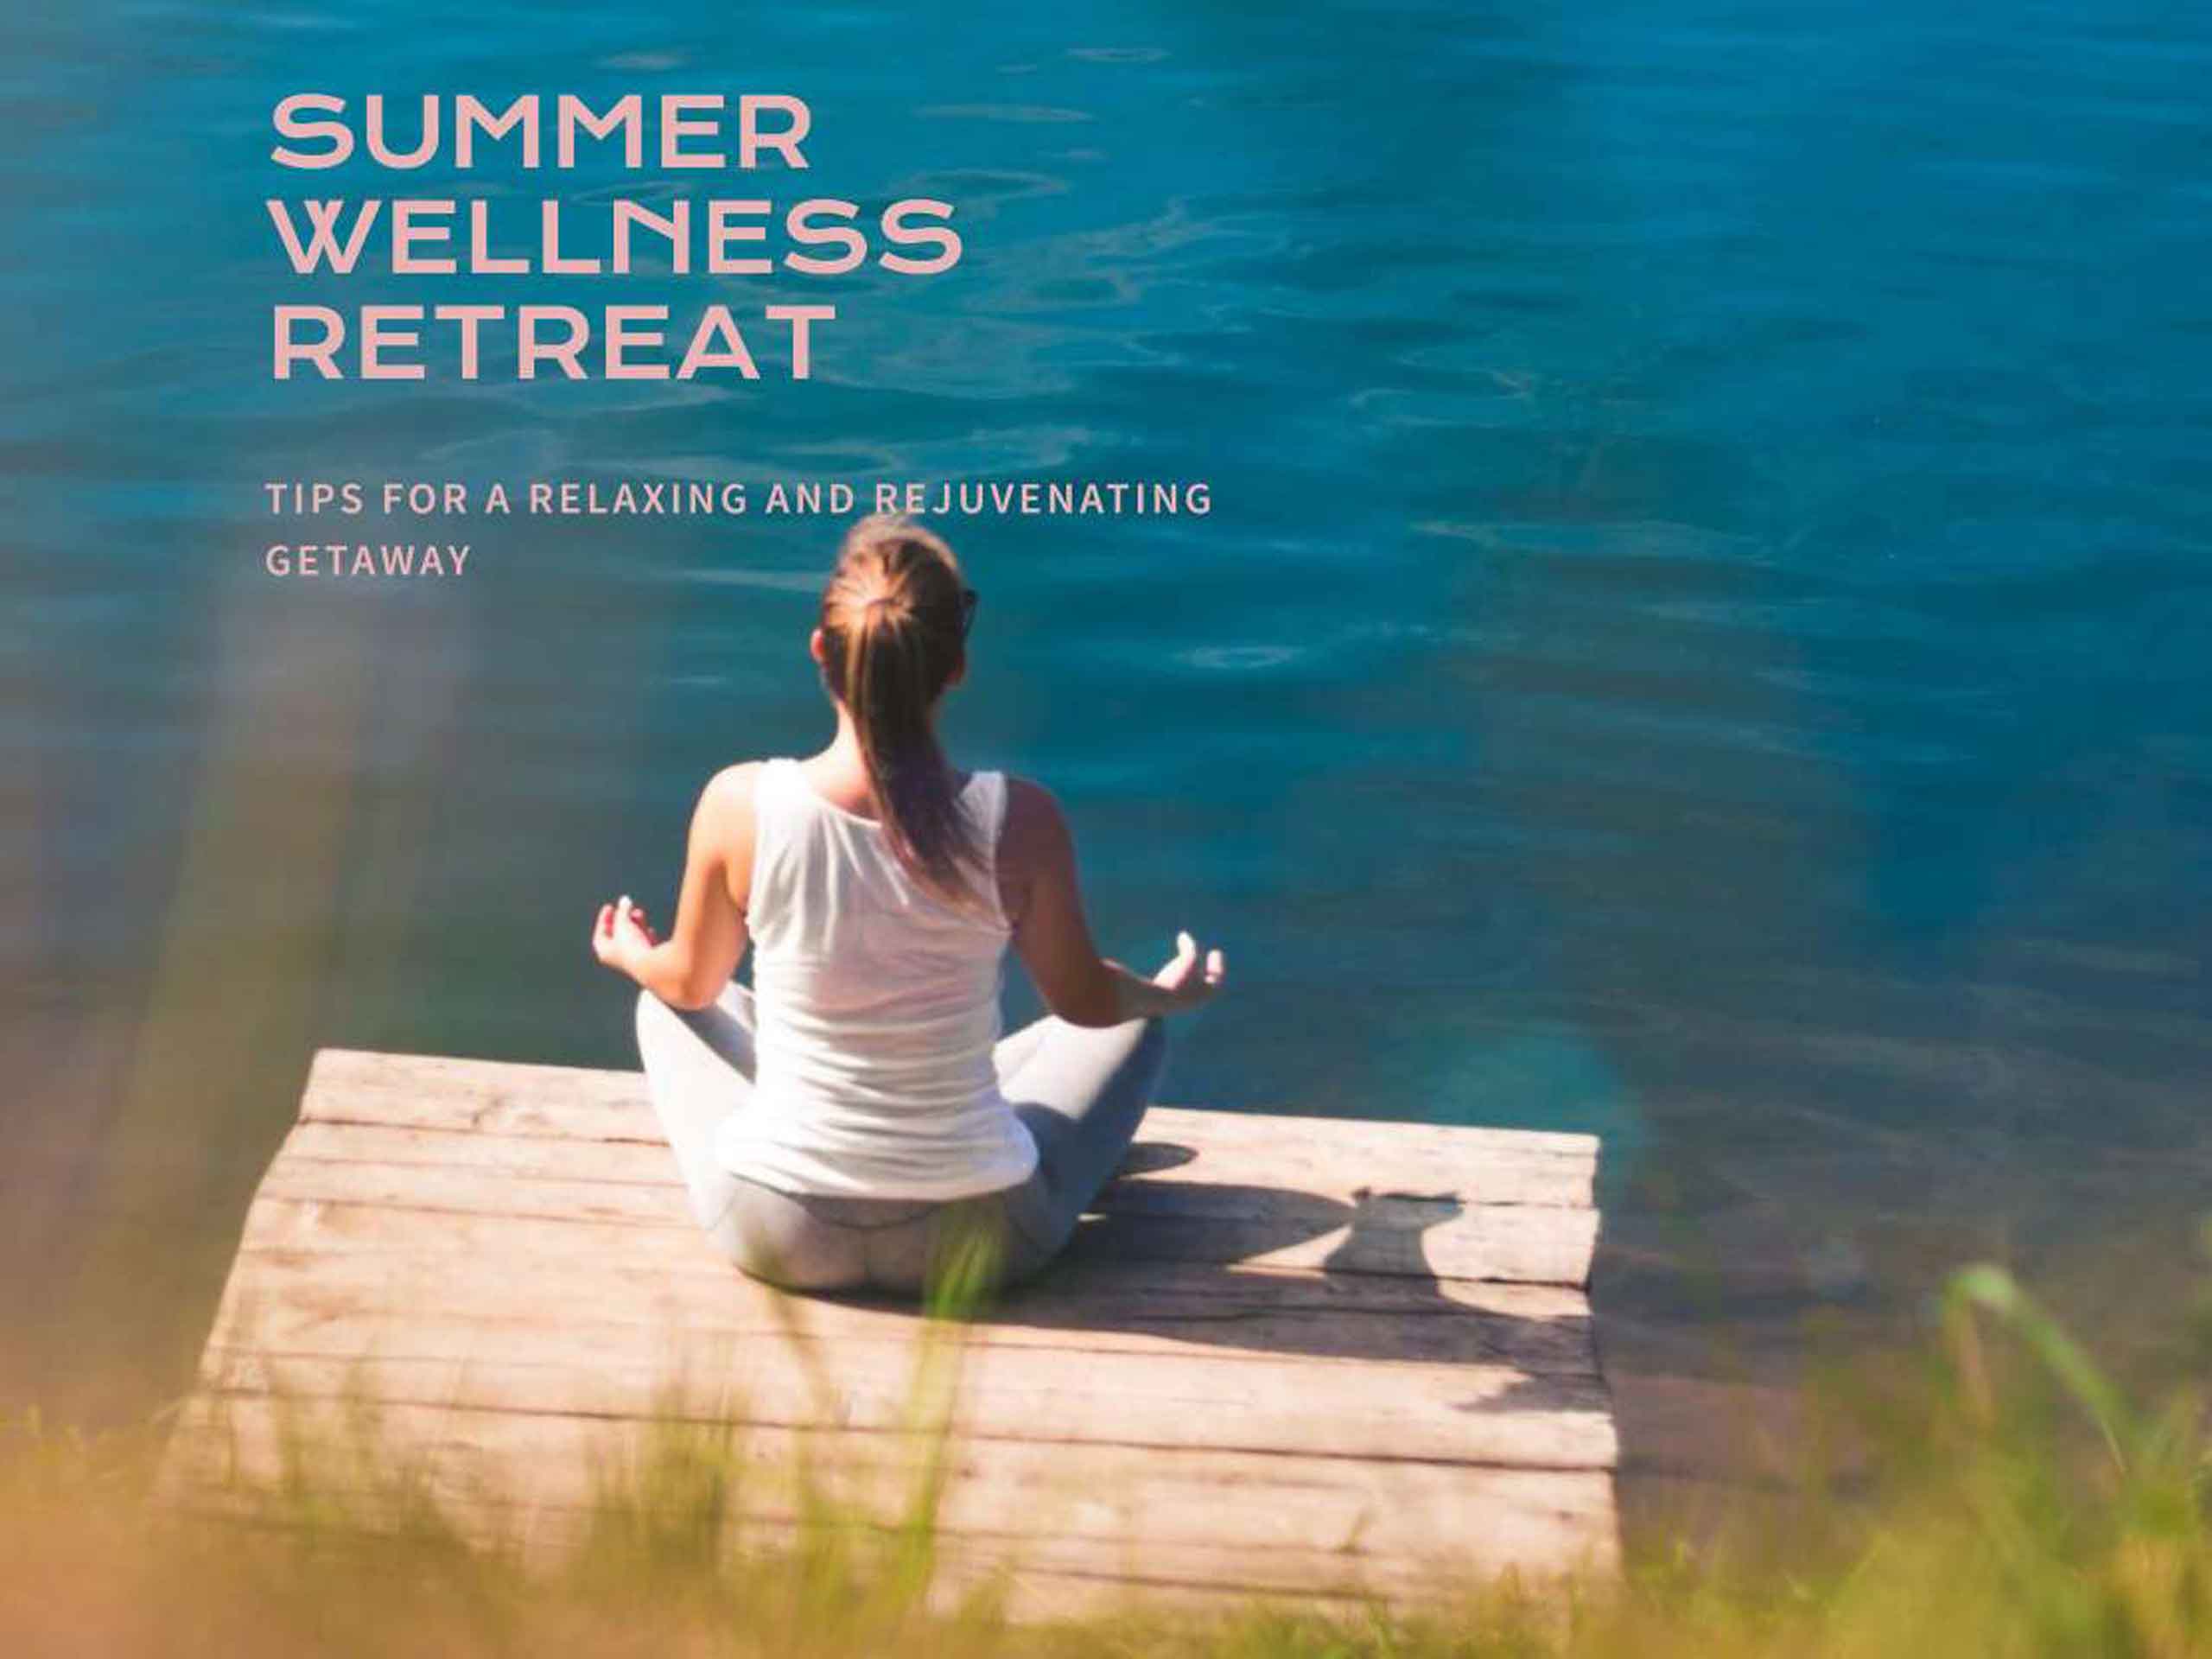 Summer Wellness Retreat: Tips for a Relaxing and Rejuvenating Getawa